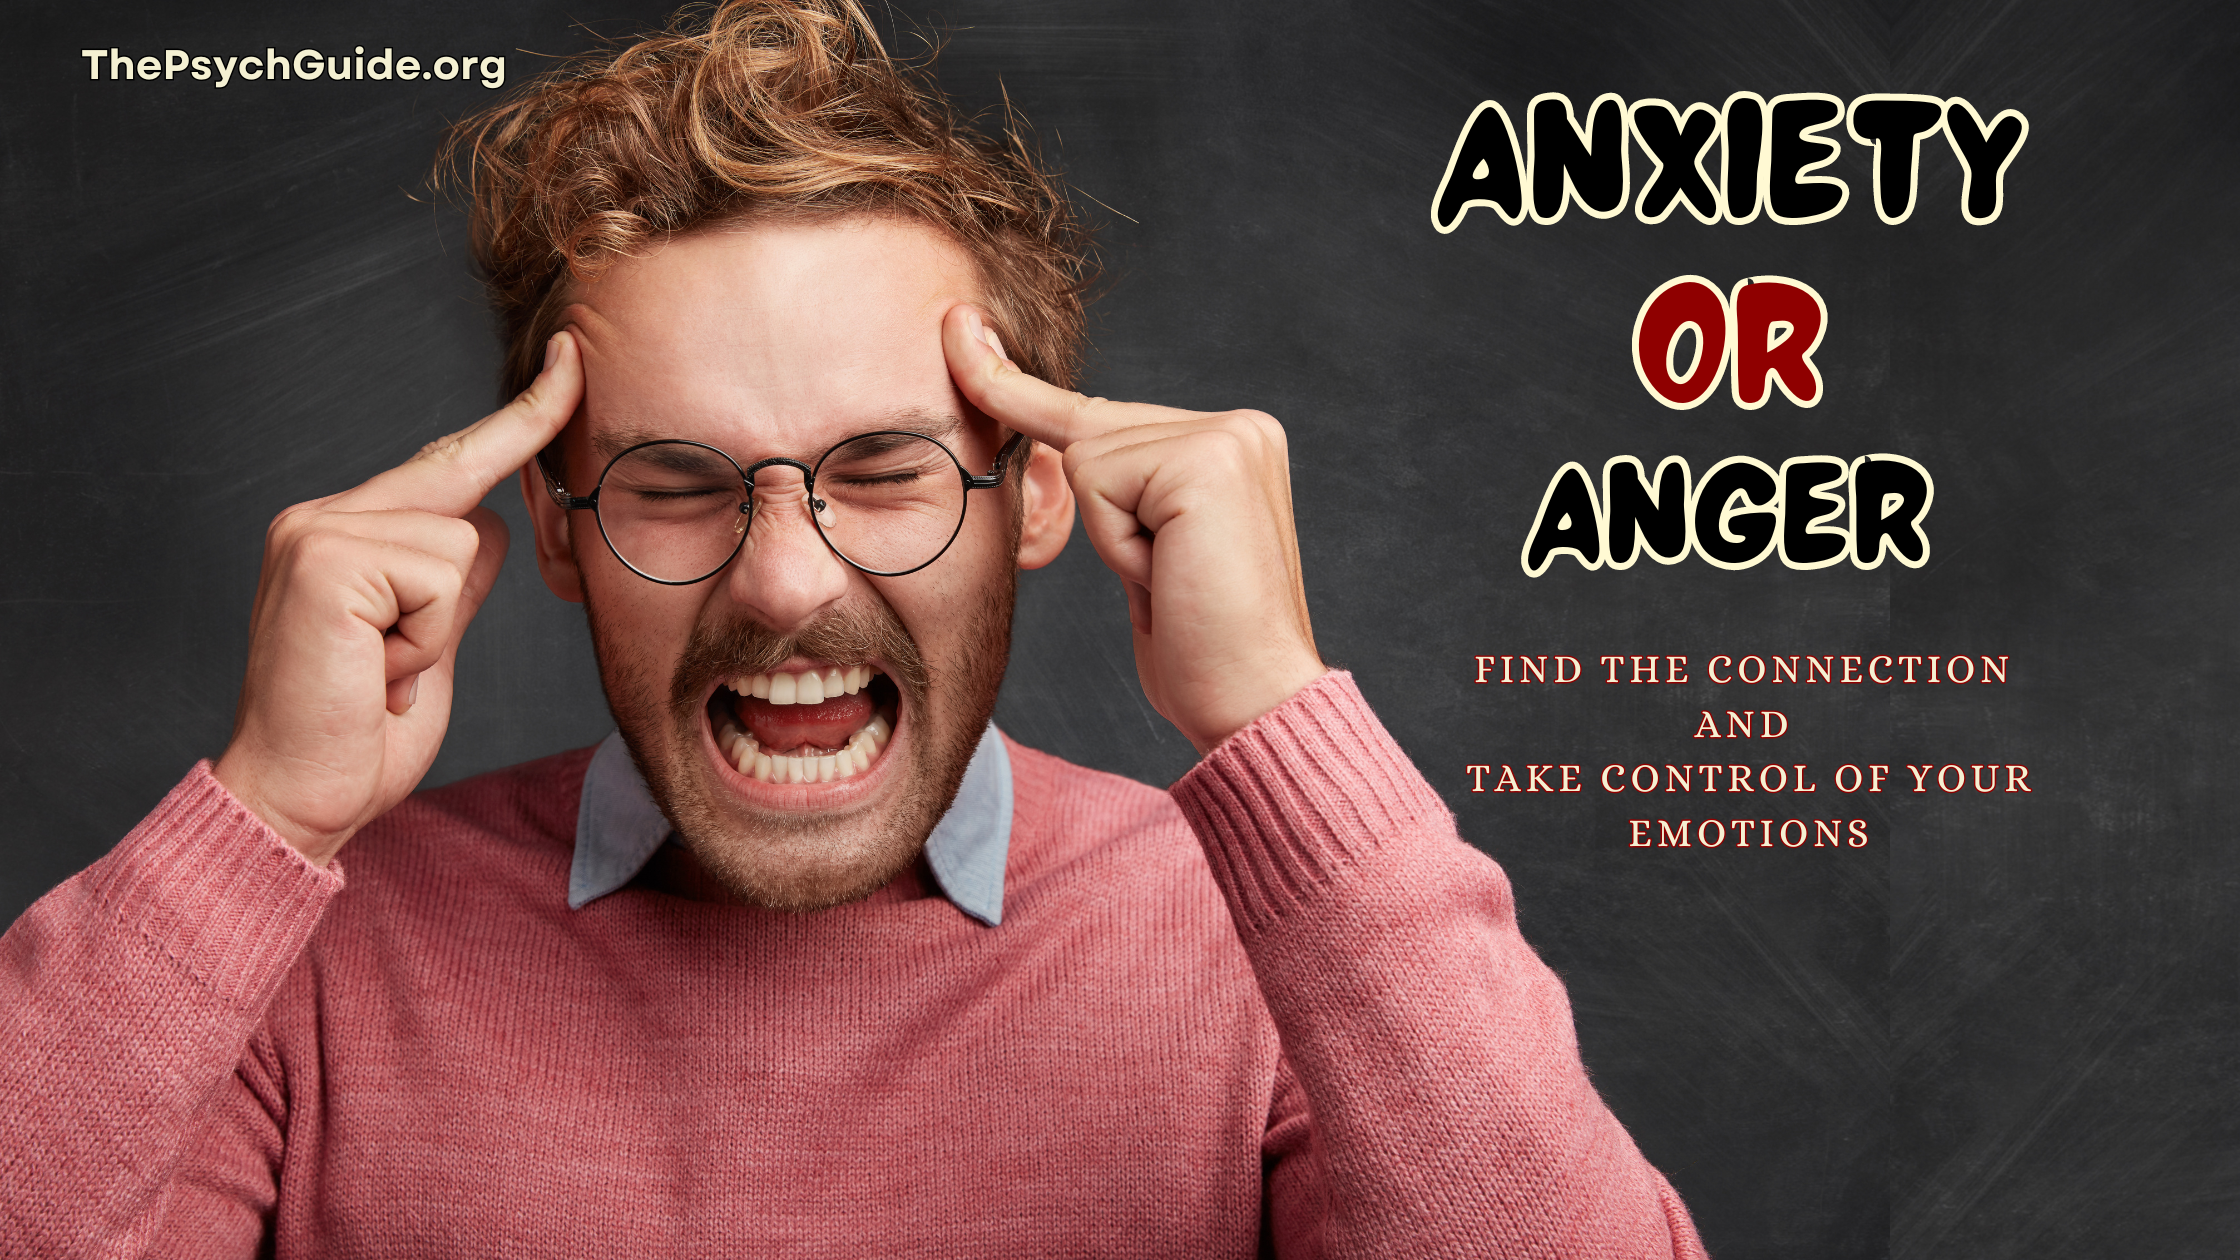 Anxiety and anger